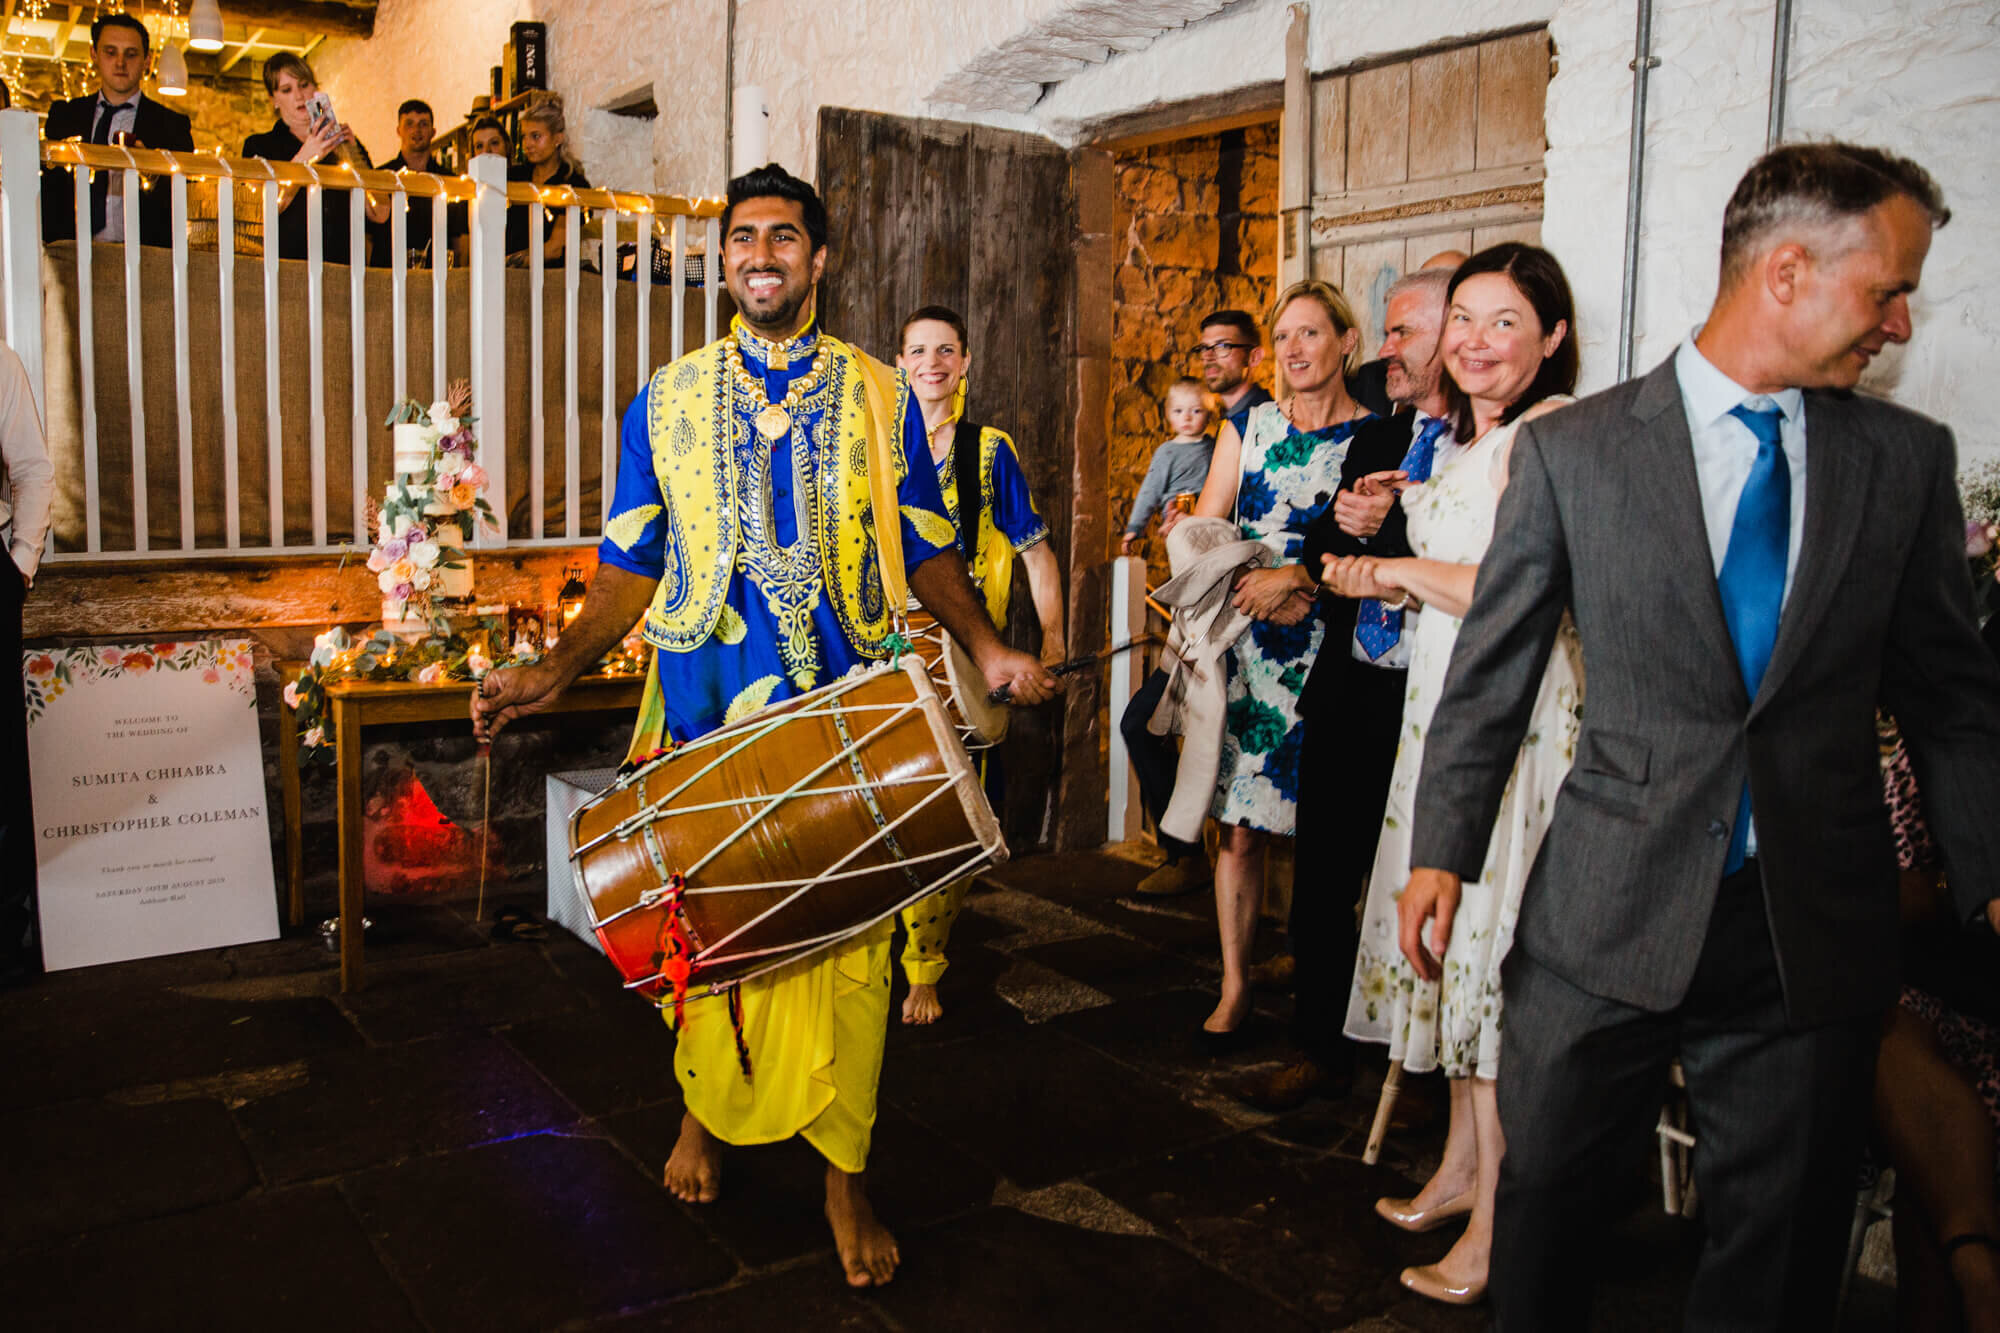 bhangra dancers enter for performance at end of nights